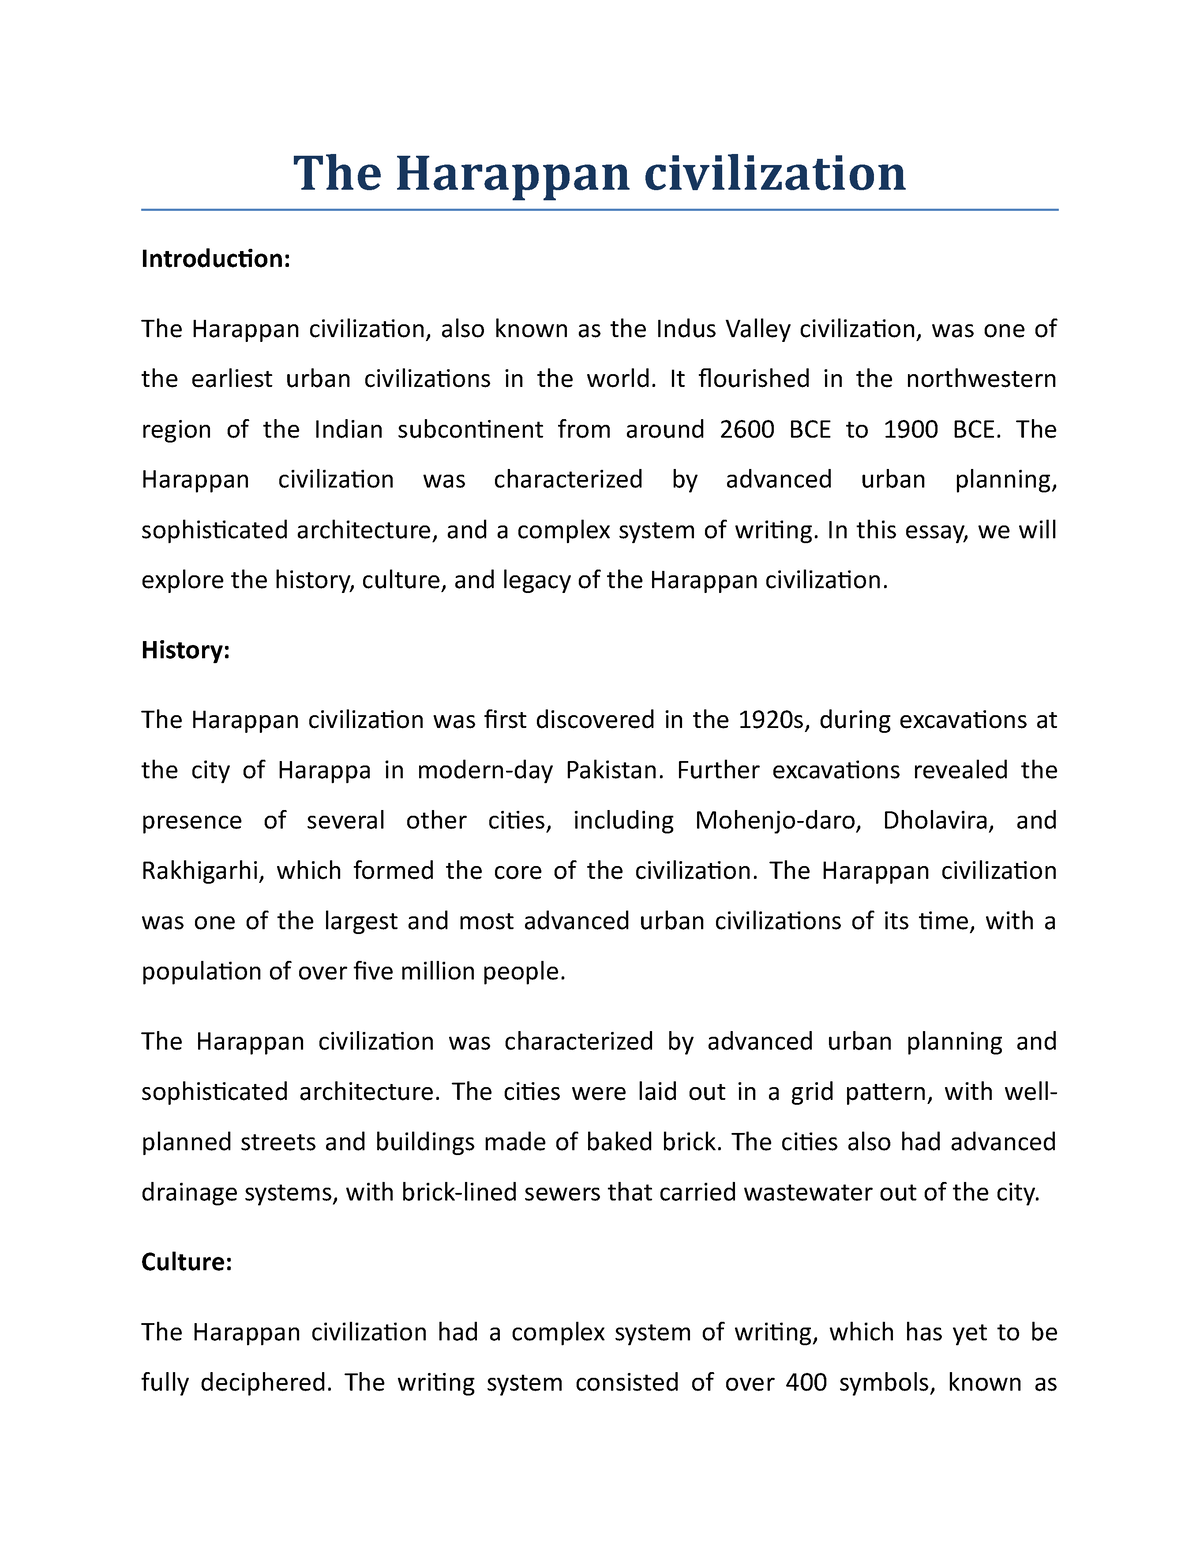 The Harappan civilization The Harappan civilization Introduction The